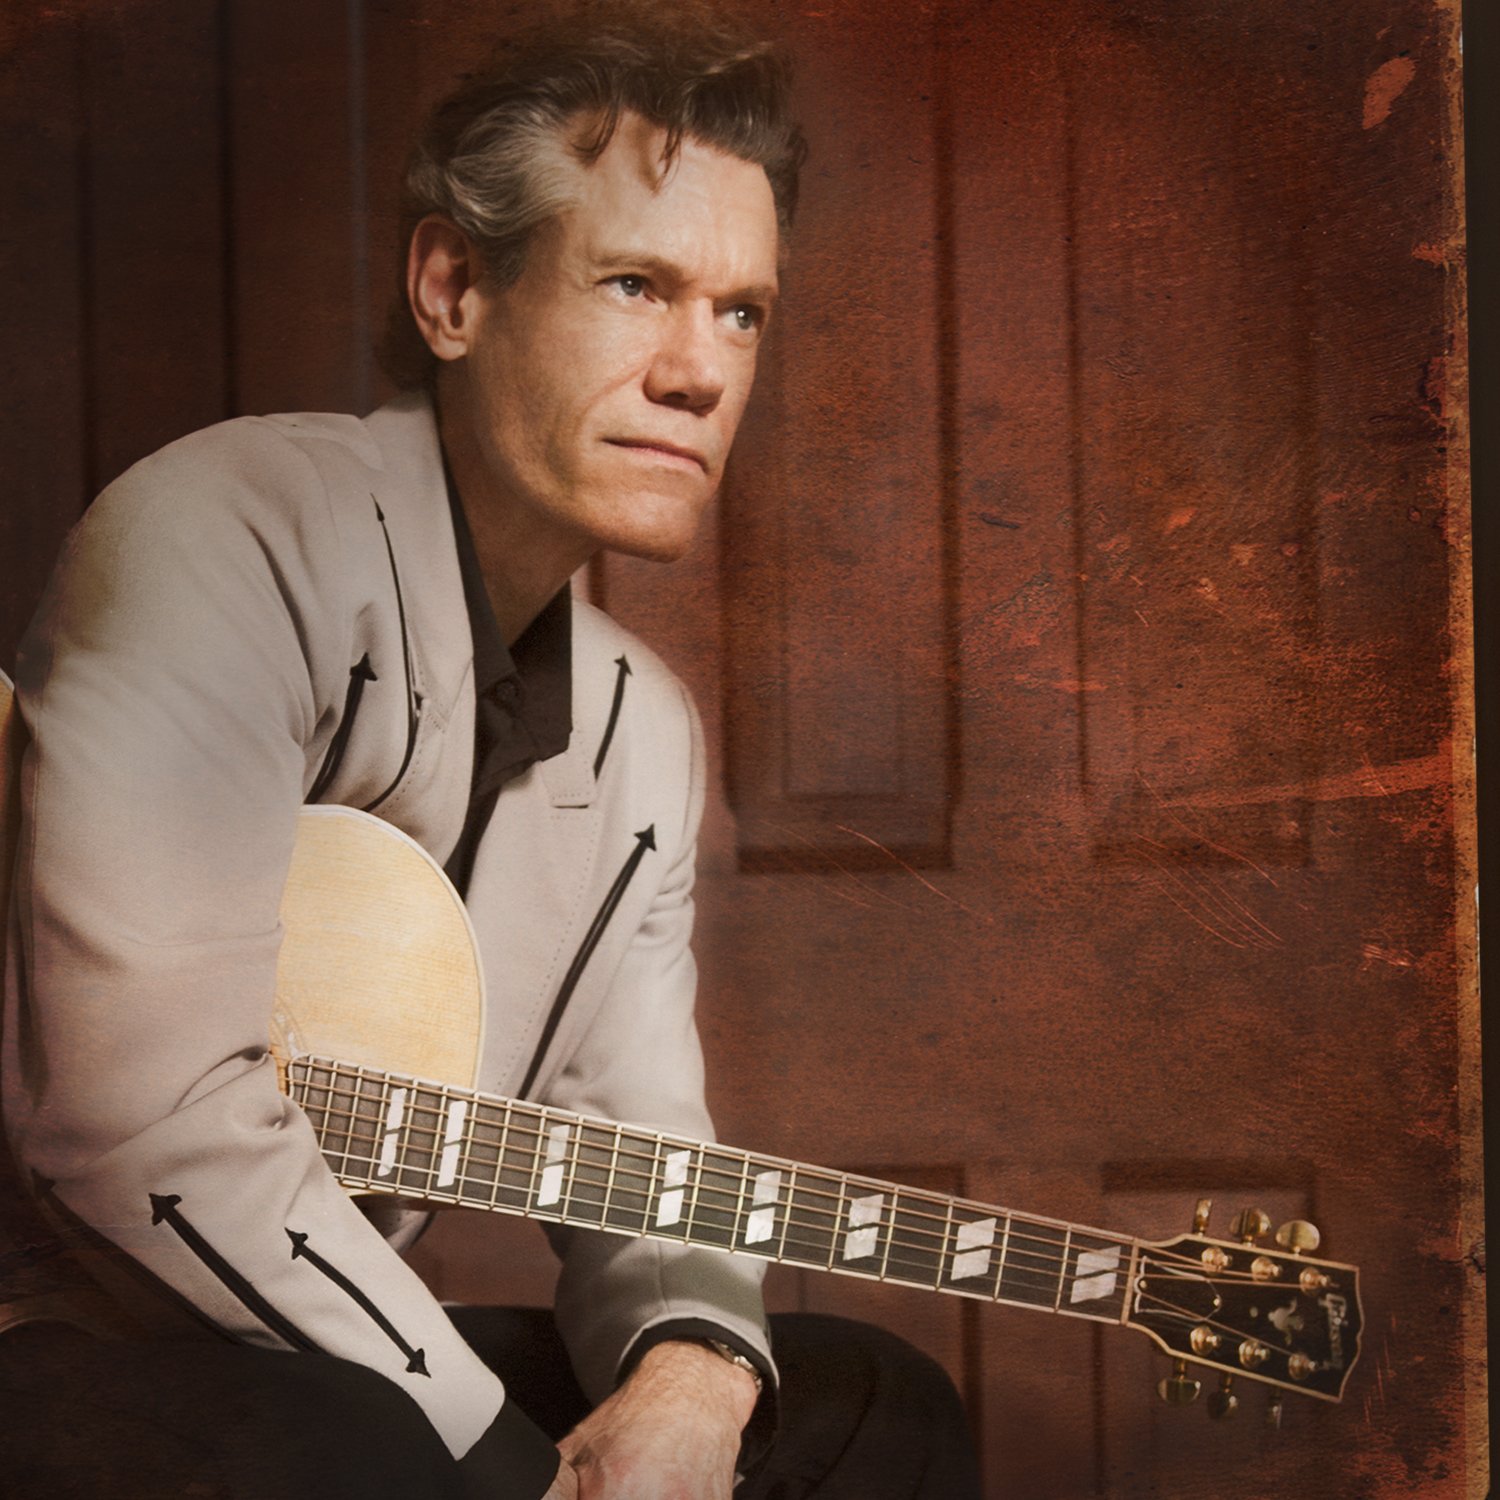 HAPPY BIRTHDAY TO THE ONE AND ONLY RANDY TRAVIS!!!!!!!          y\all be sure to wish him happy bday! -Team 